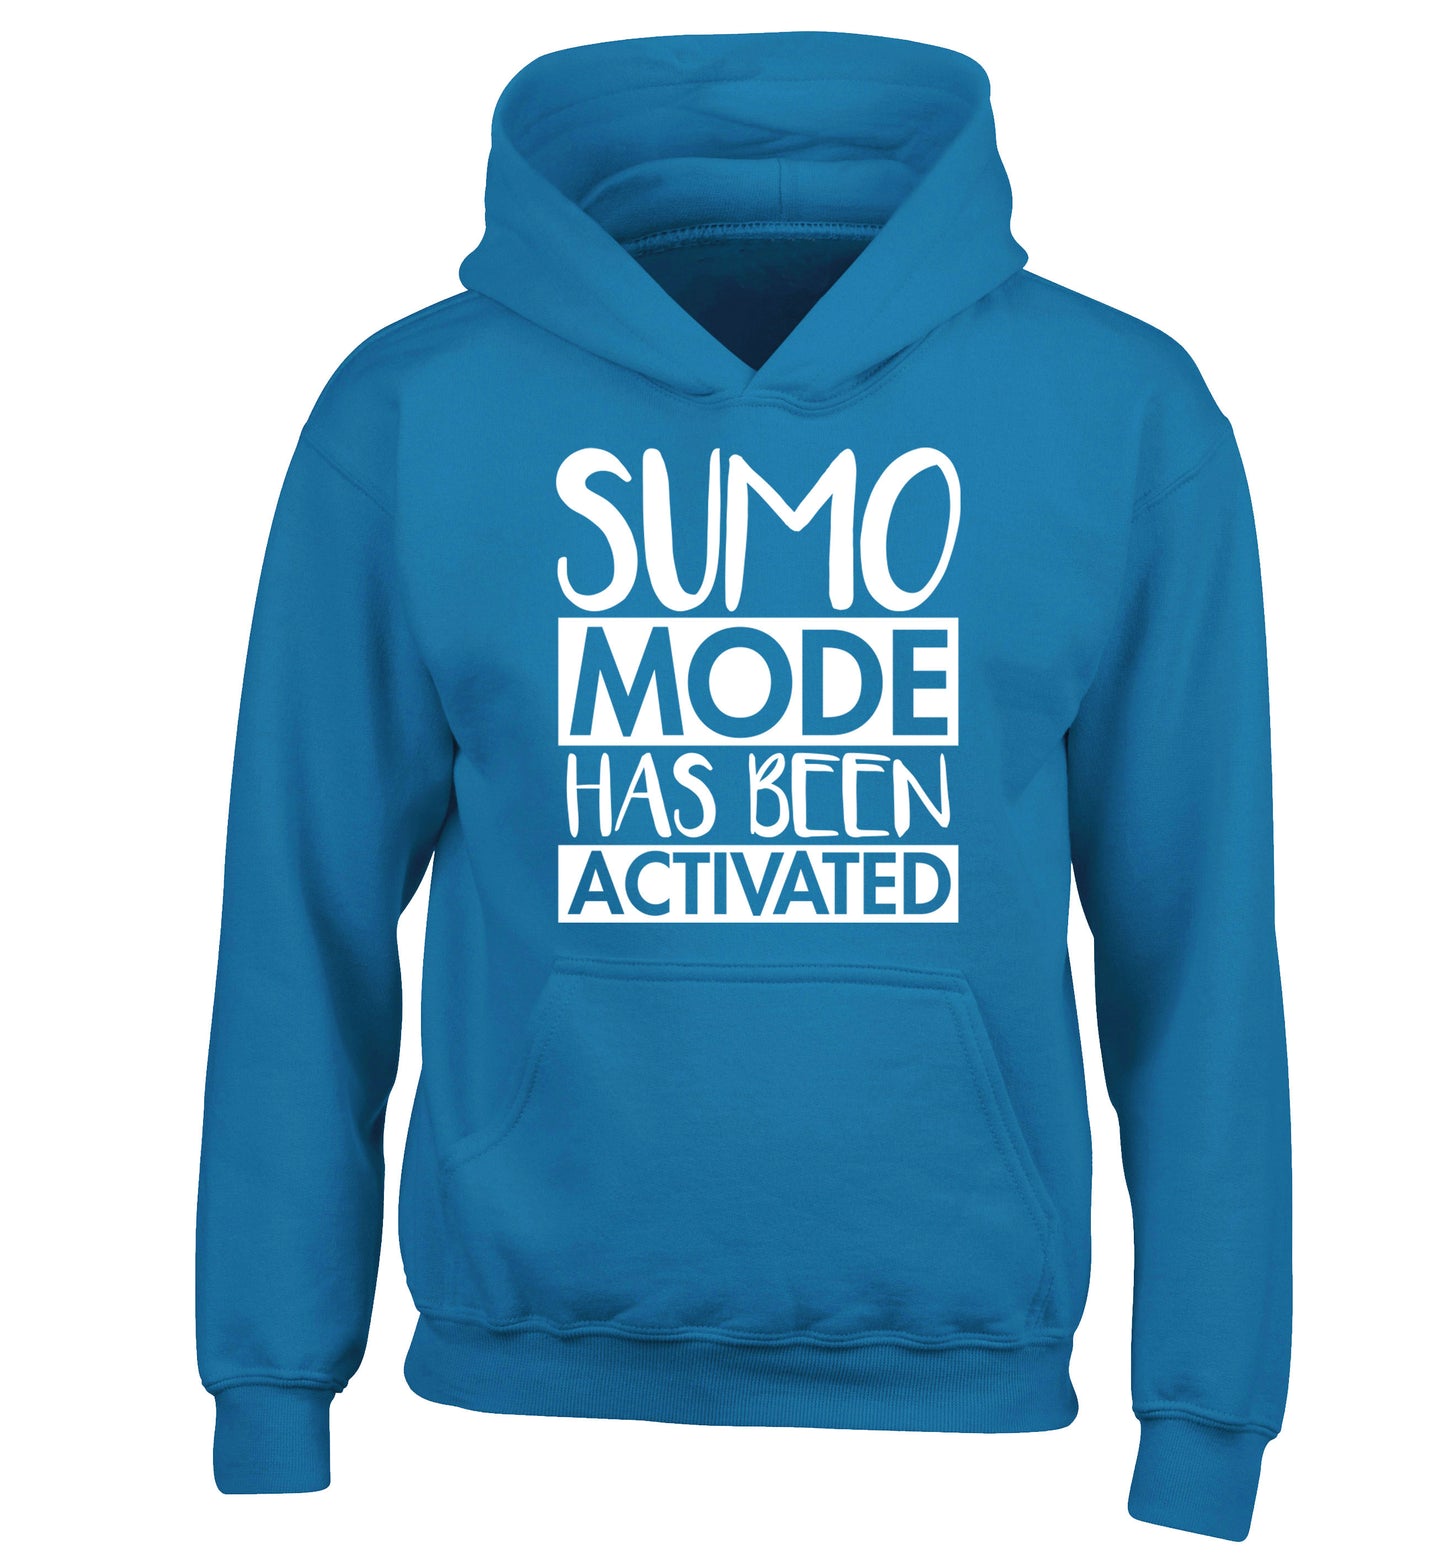 Sumo mode activated children's blue hoodie 12-14 Years